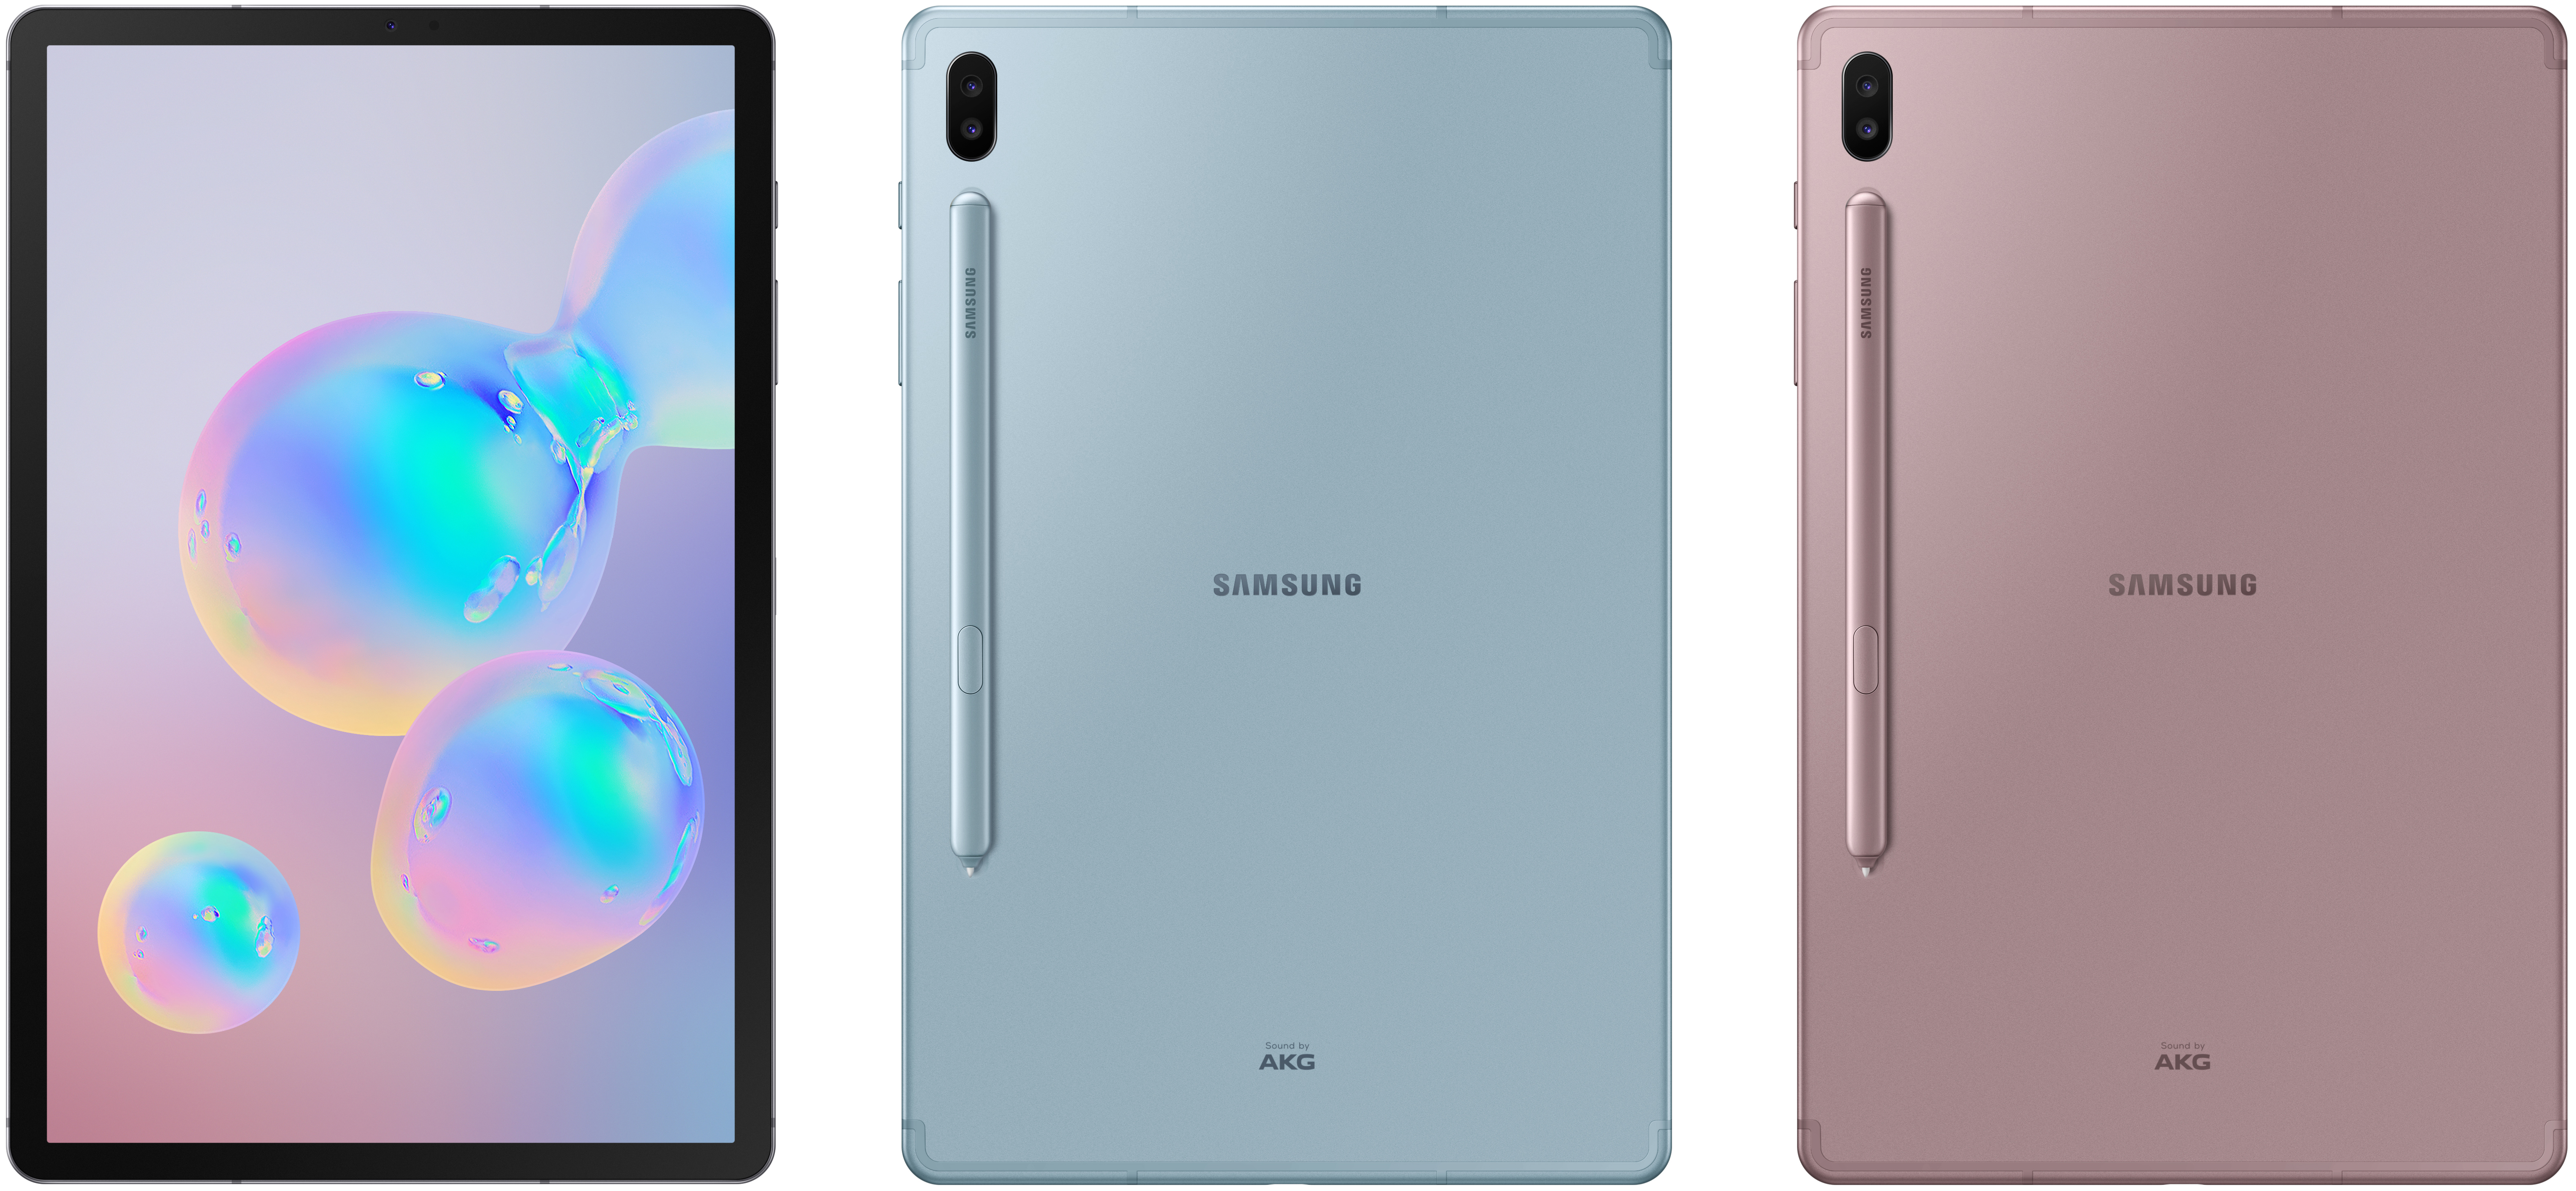 https://images.anandtech.com/doci/14699/Product-Image-Galaxy-Tab-S6-W.jpg